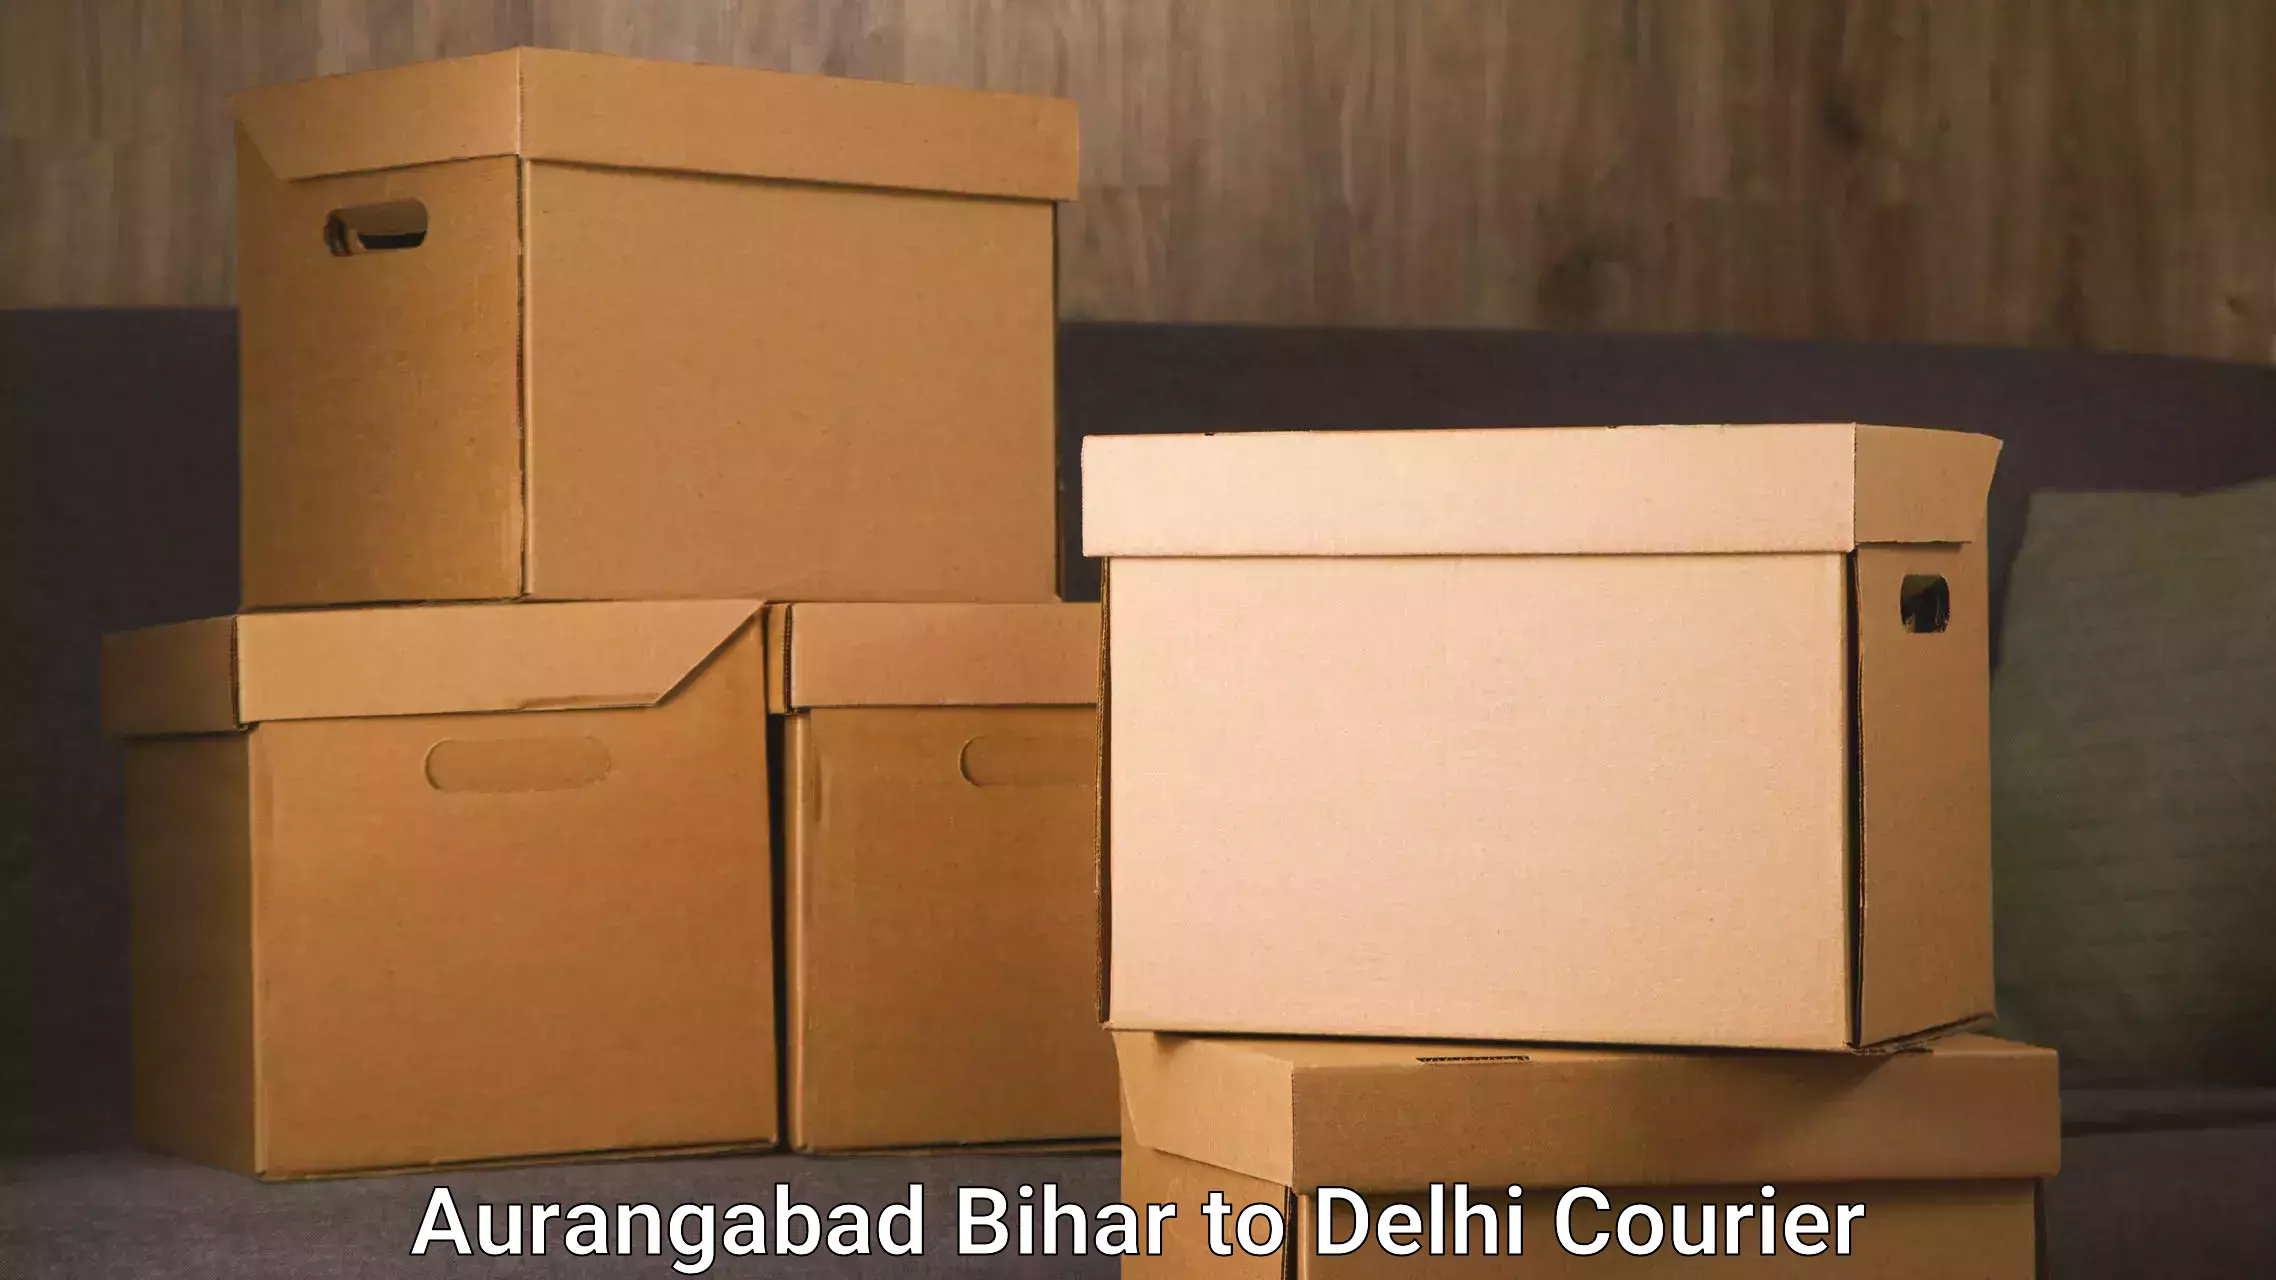 Efficient moving and packing Aurangabad Bihar to NCR